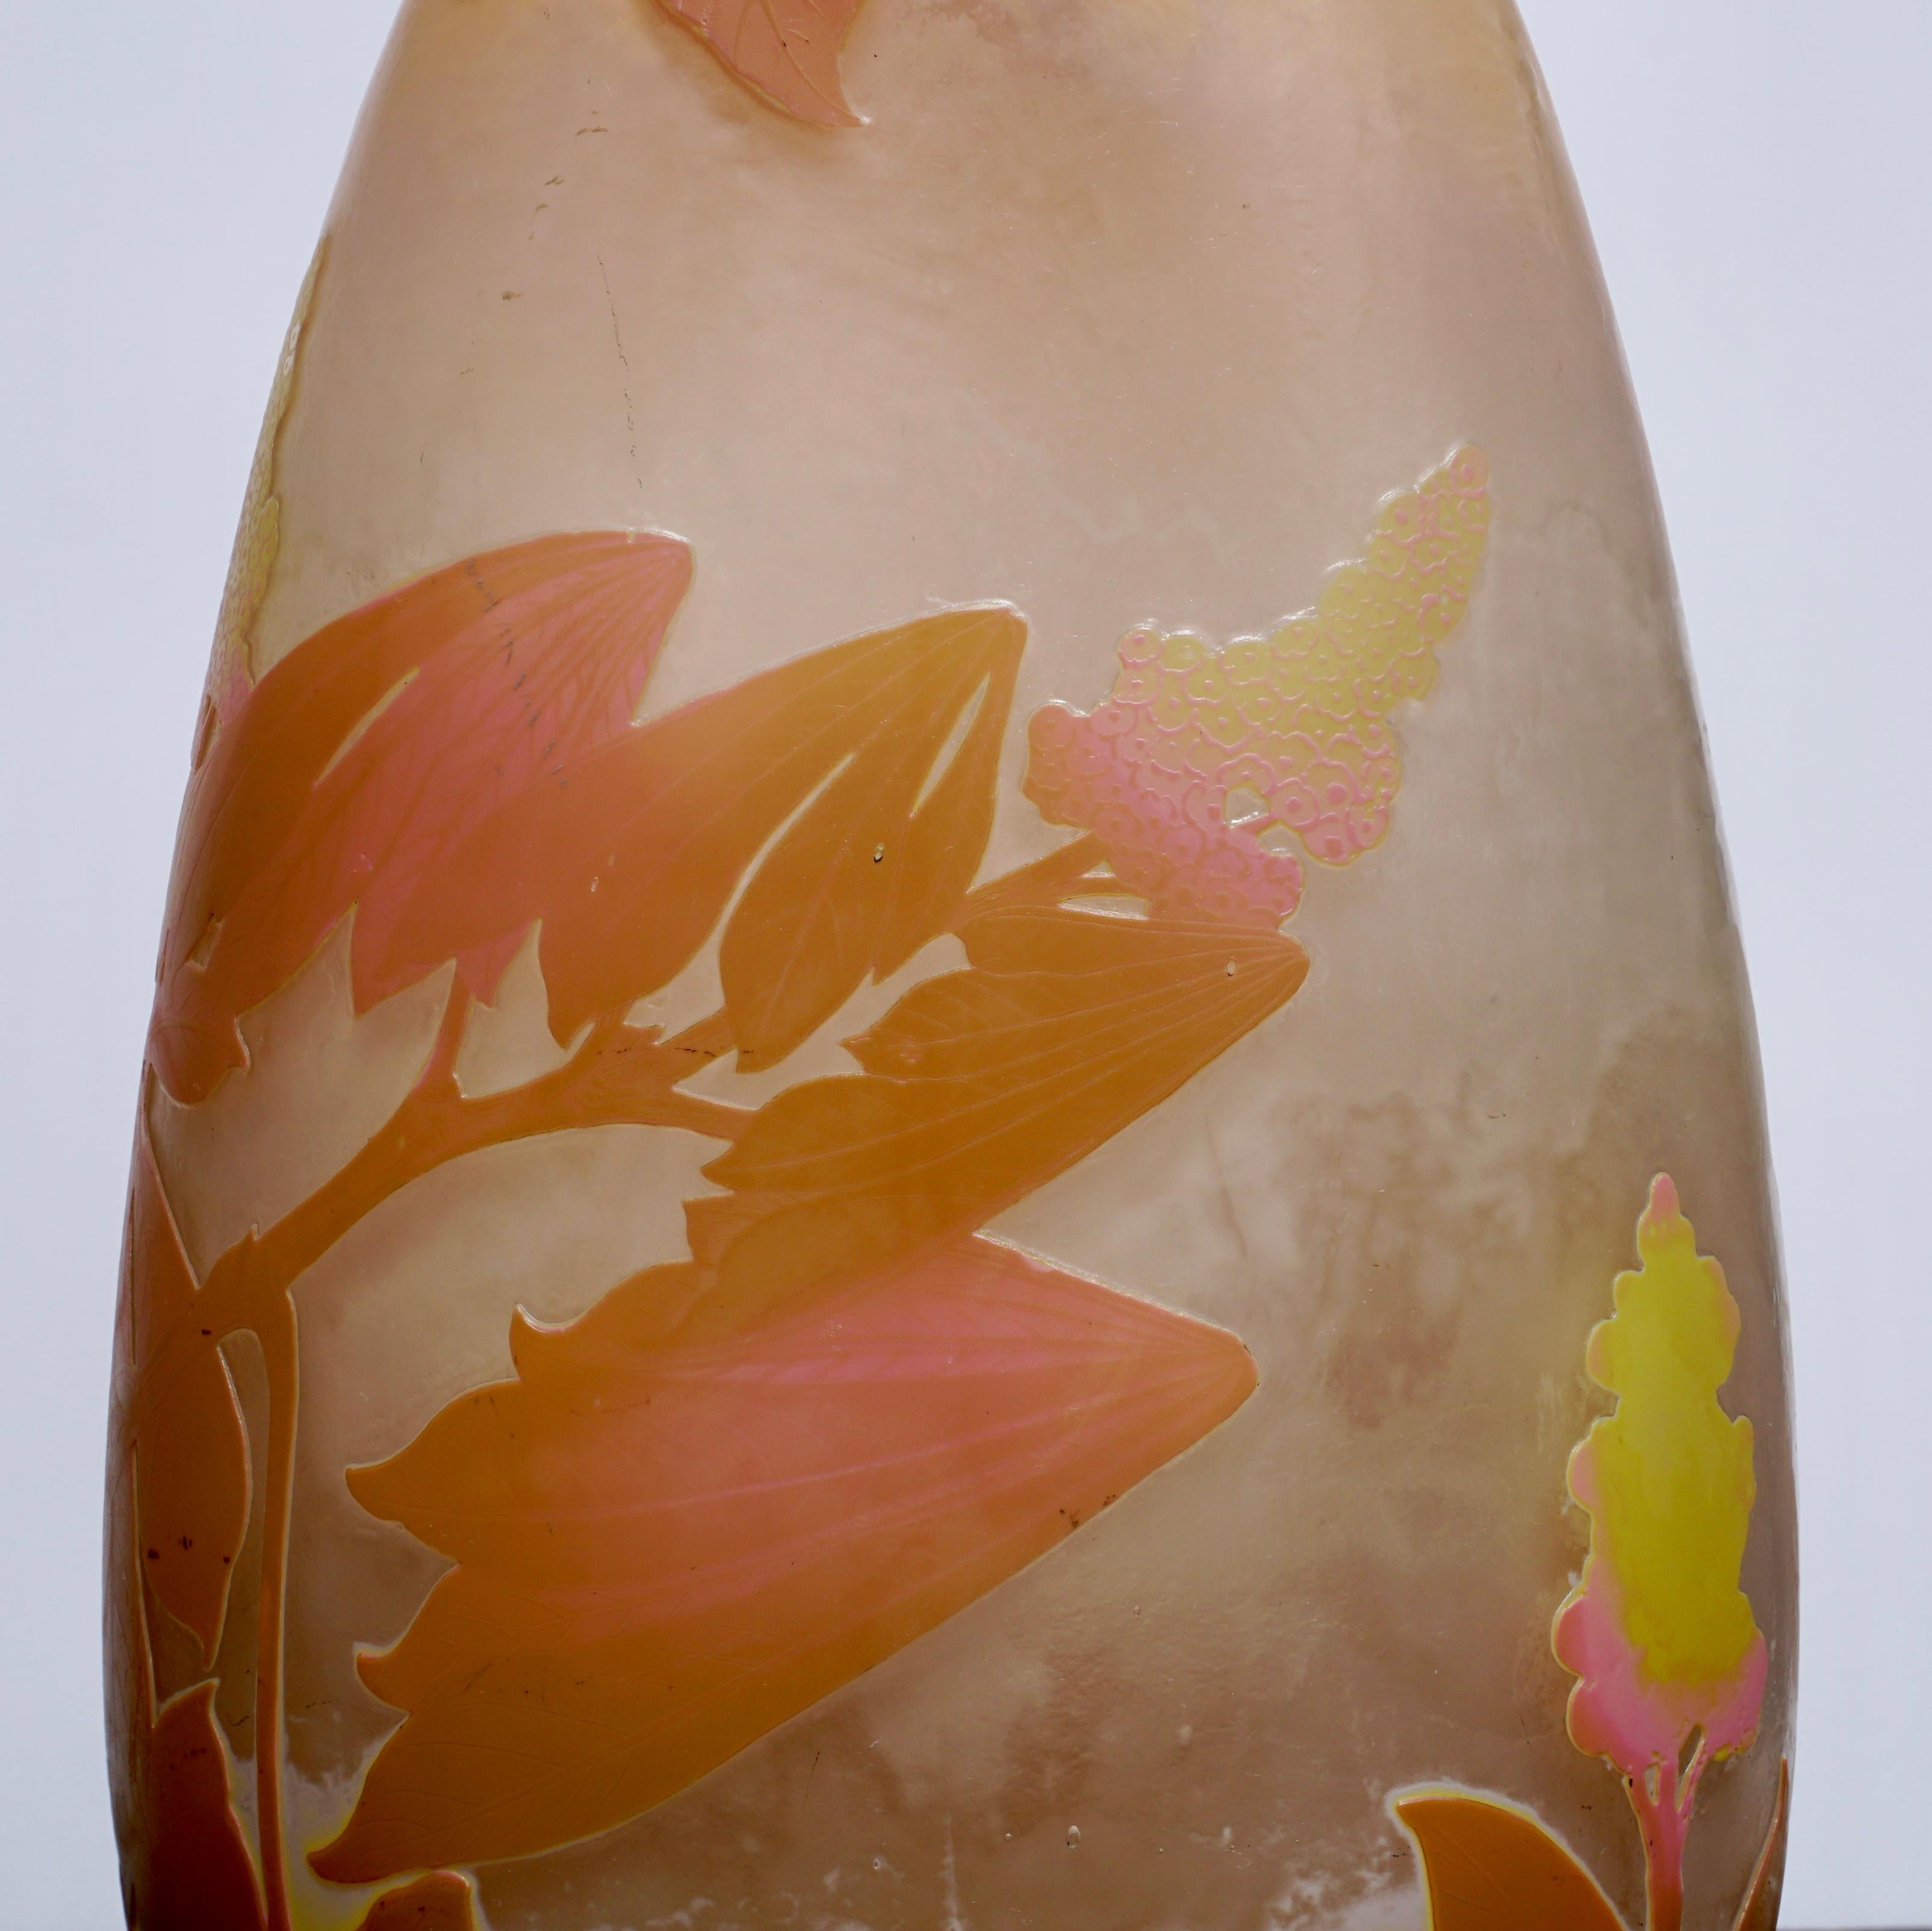 Monumental Emile Galle Four-Color Botanicals Vase, circa 1905 In Excellent Condition For Sale In Dallas, TX